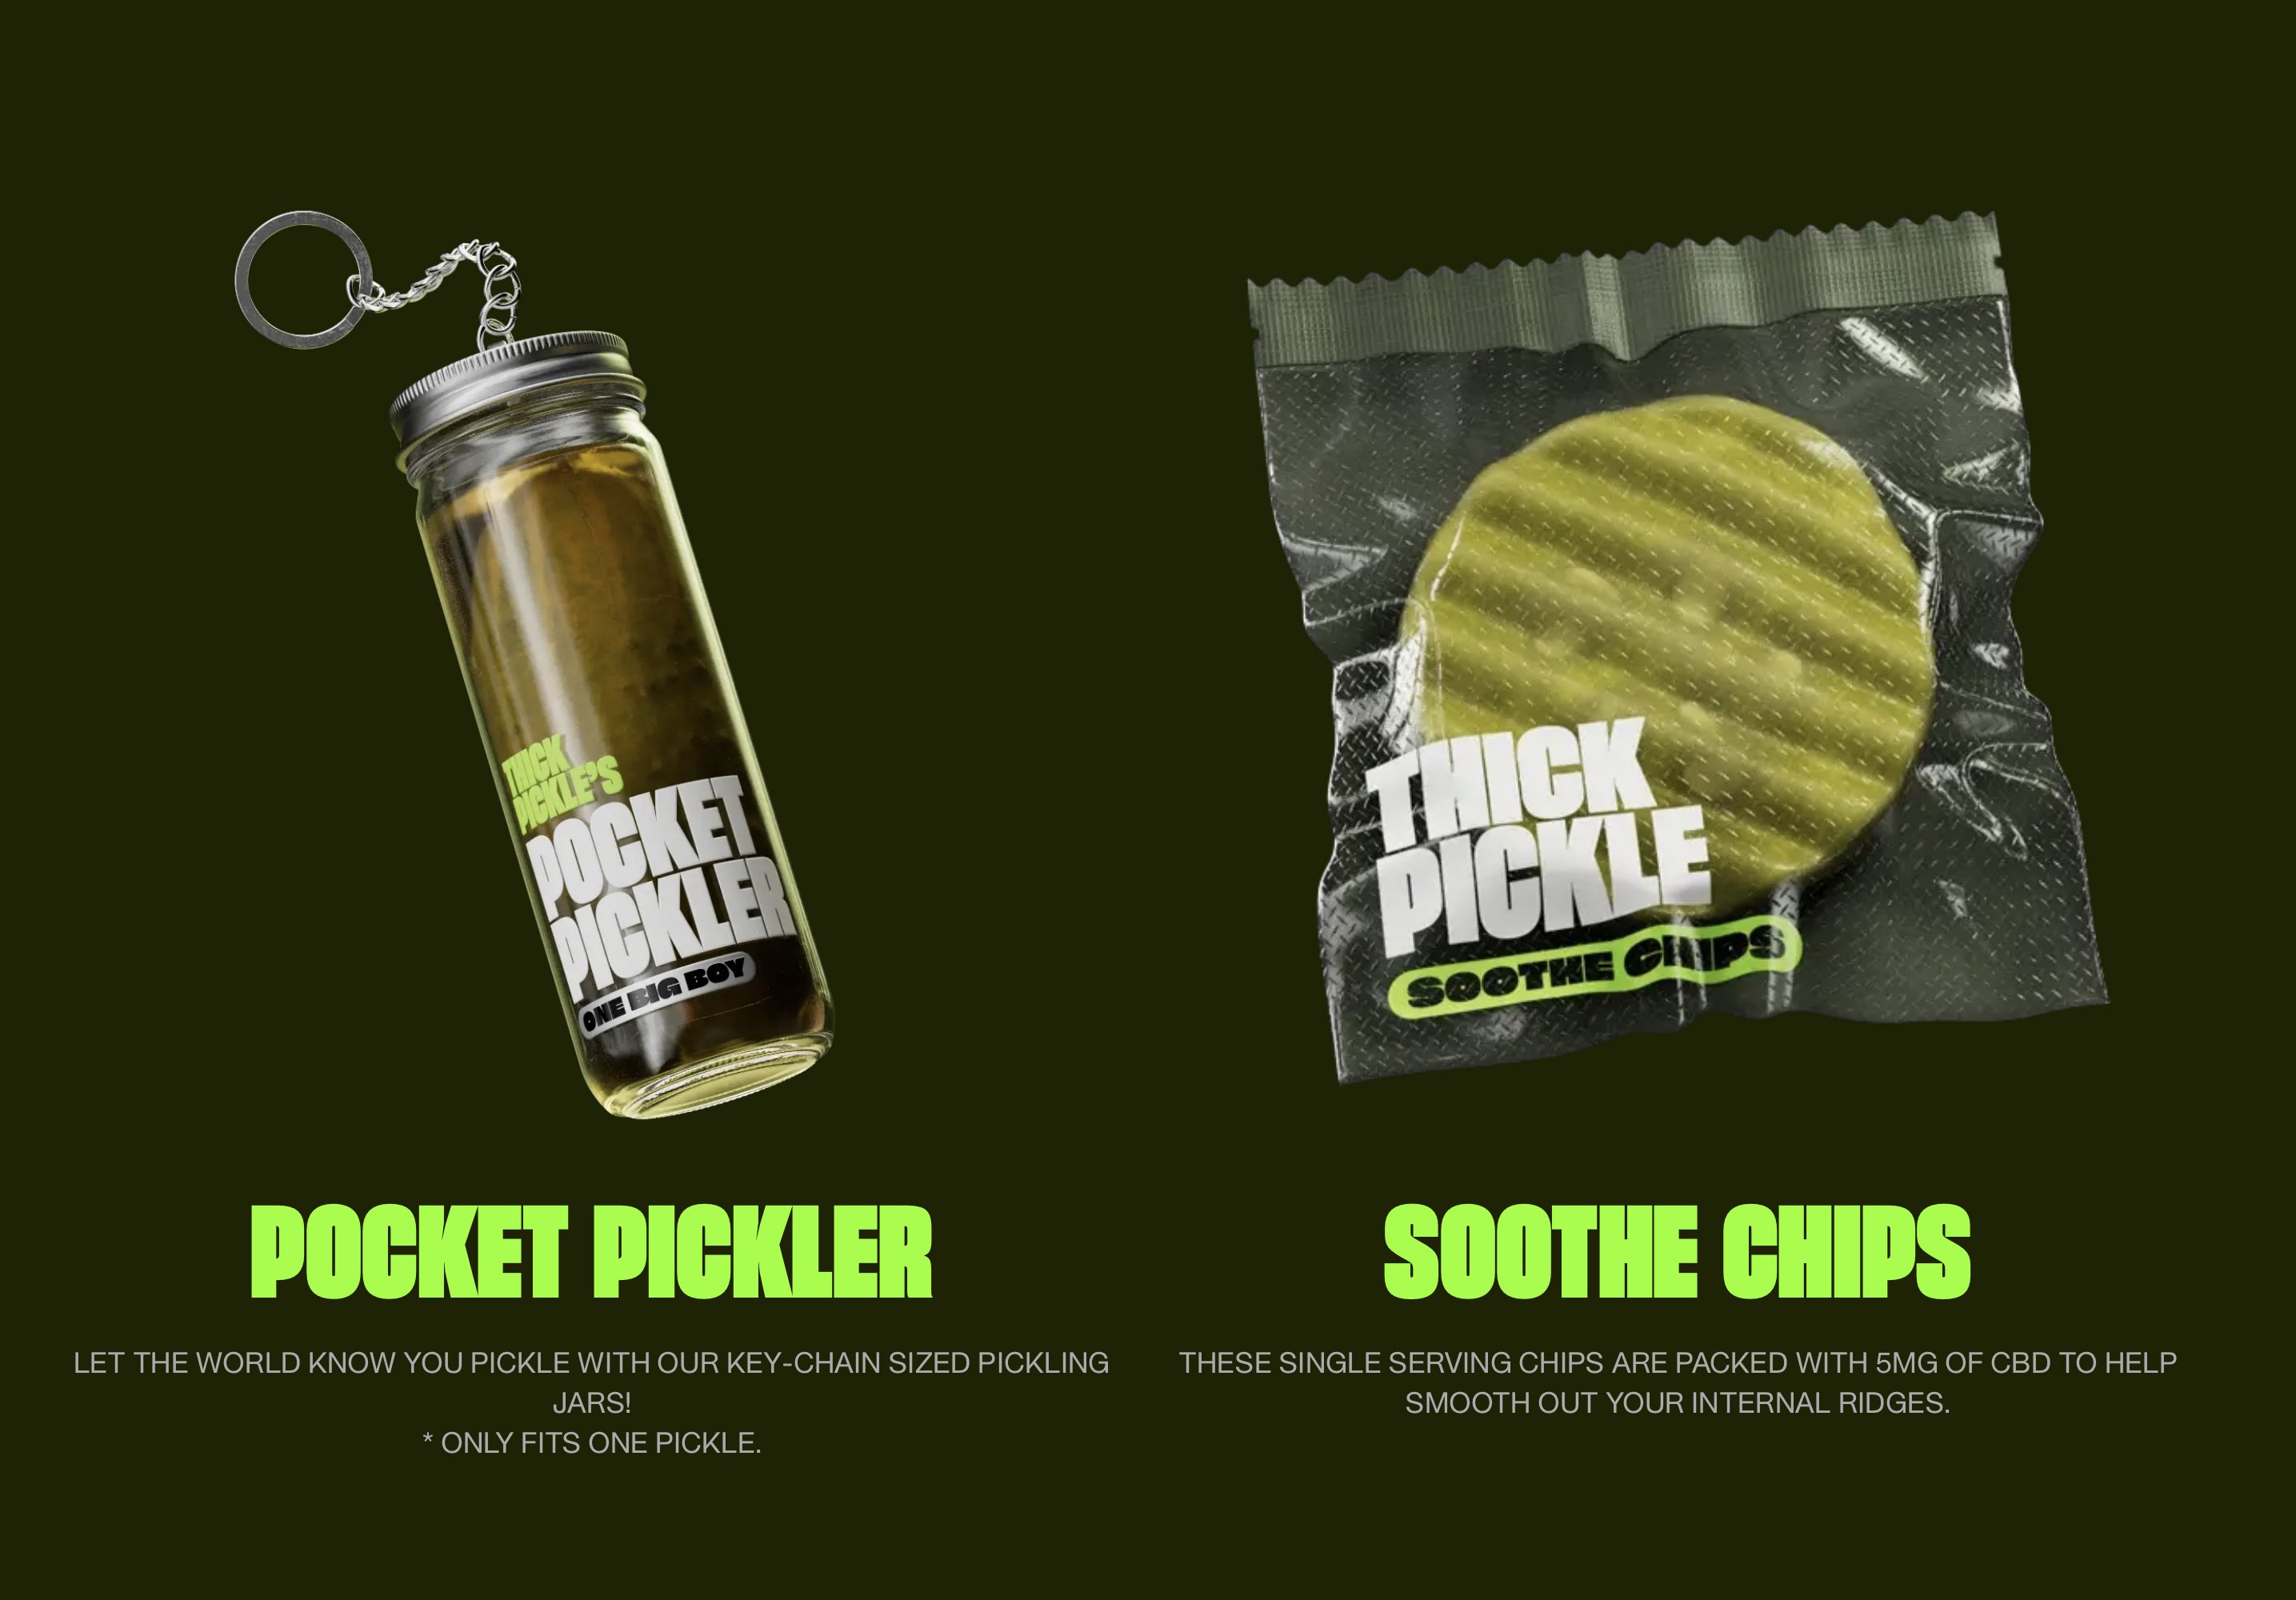 Branding concept by Study Hall for Thick Pickle, including motion graphics, logotype and packaging design